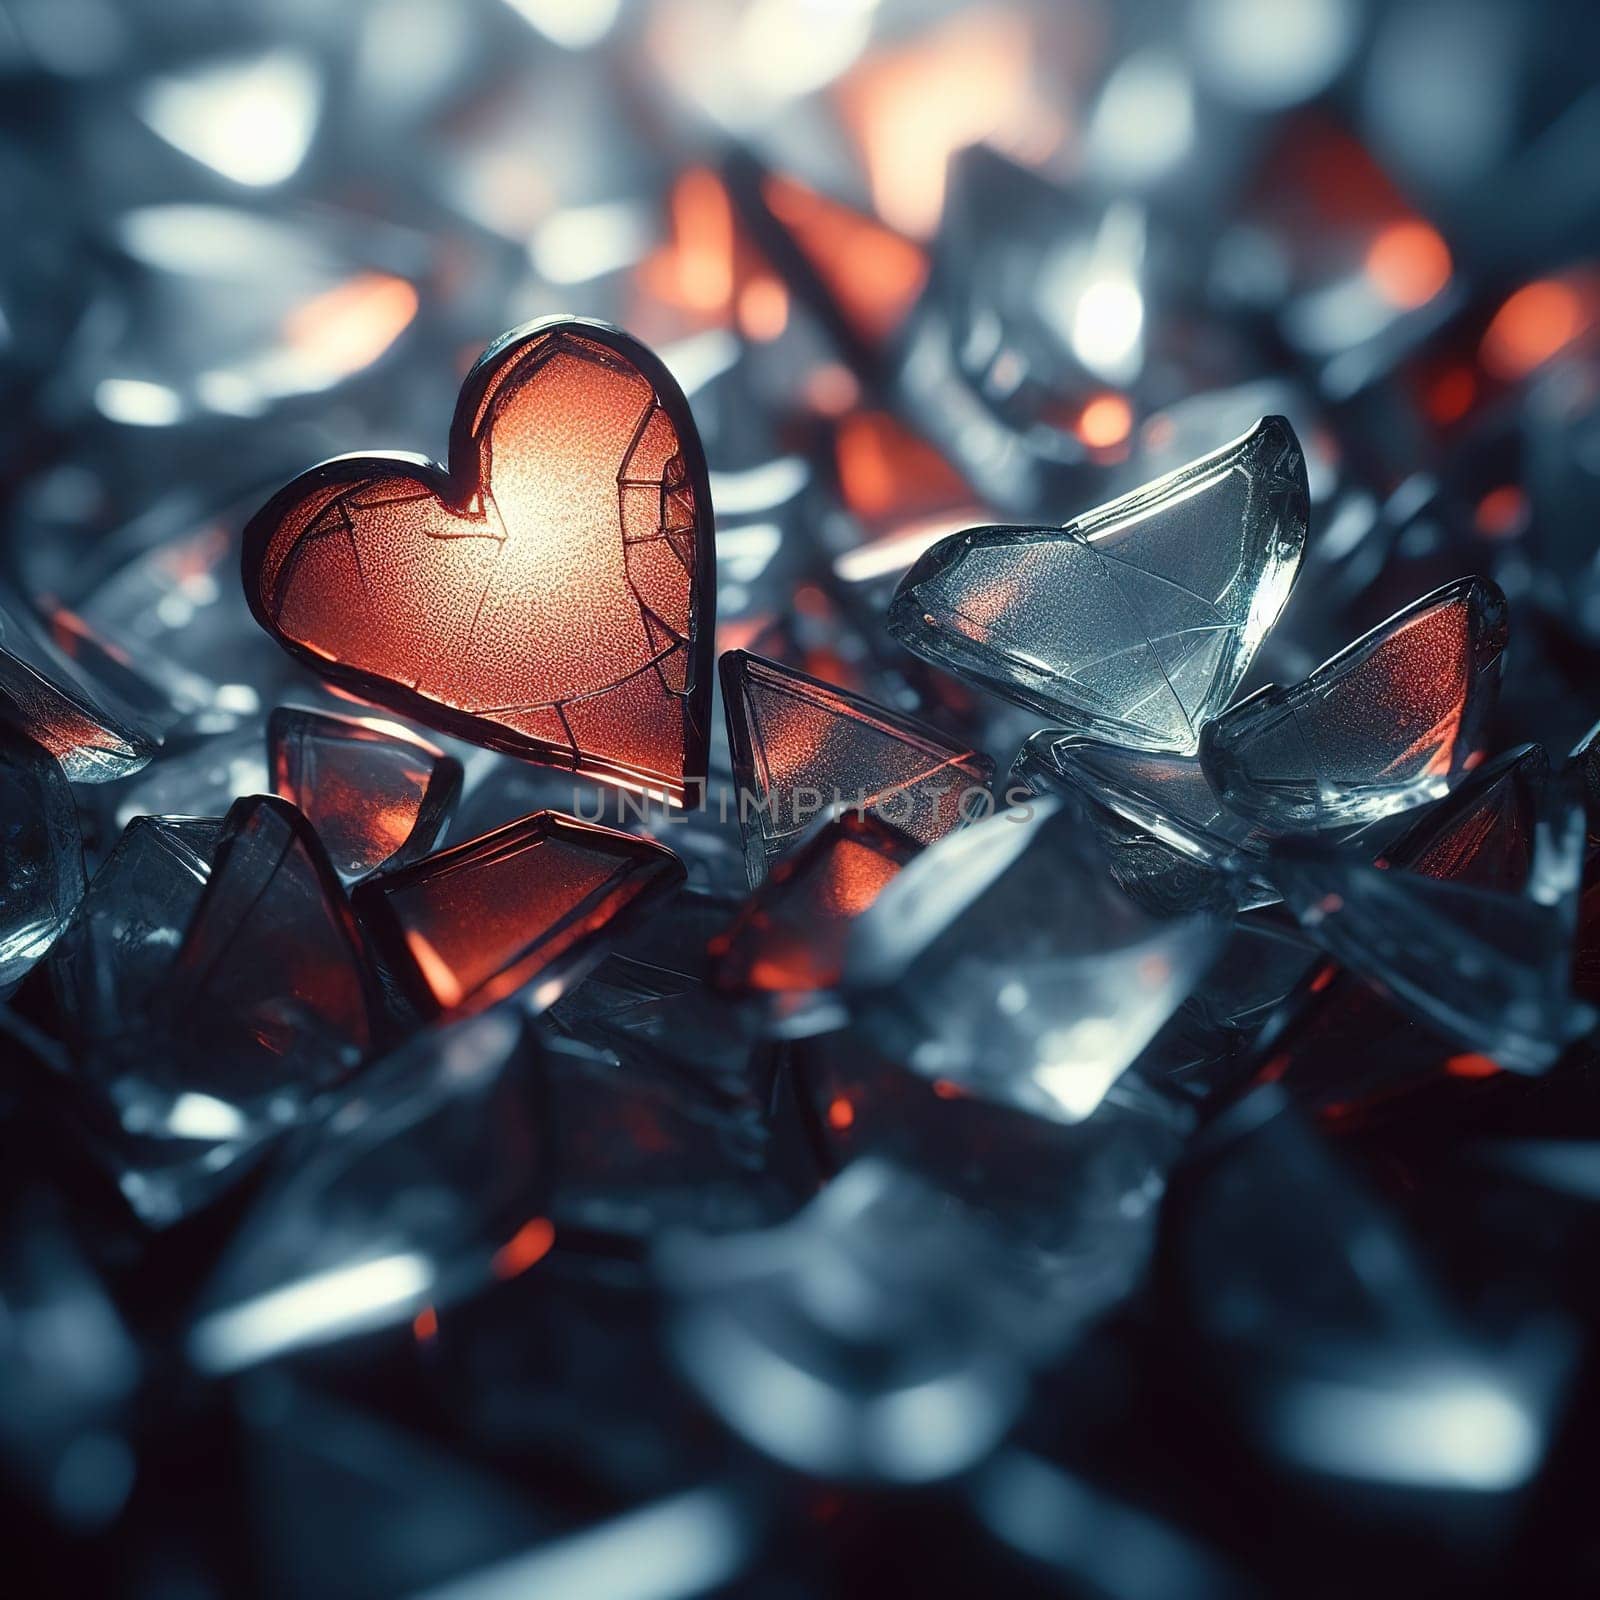 Glass heart shattered by gordiza